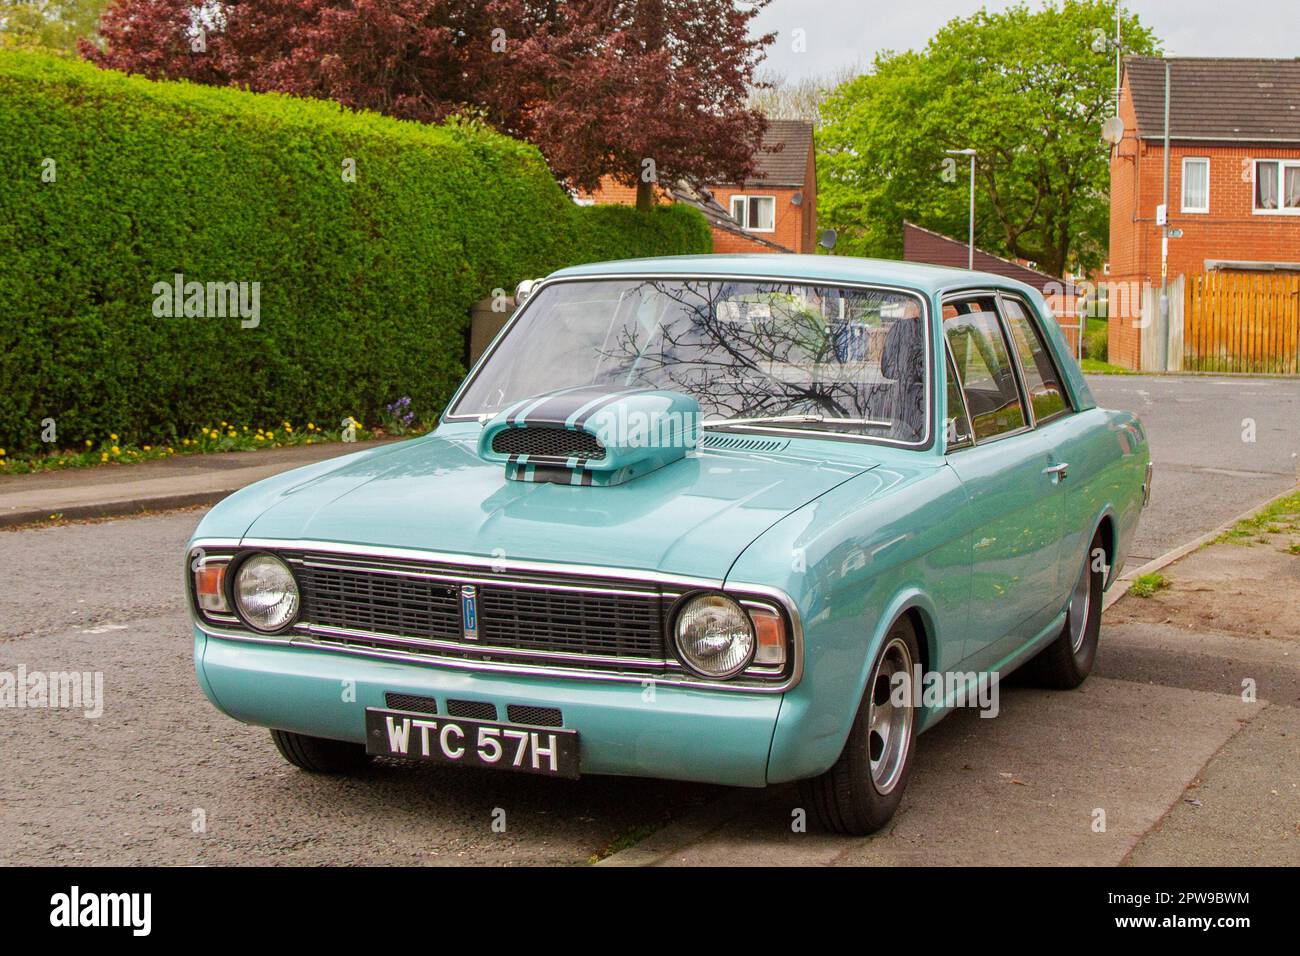 1970 70s seventies custom Ford Cortina Blue 3500 cc V8 Turbo, Ford Cortina Super Mark II two-door saloon parked in Leyland, UK Stock Photo